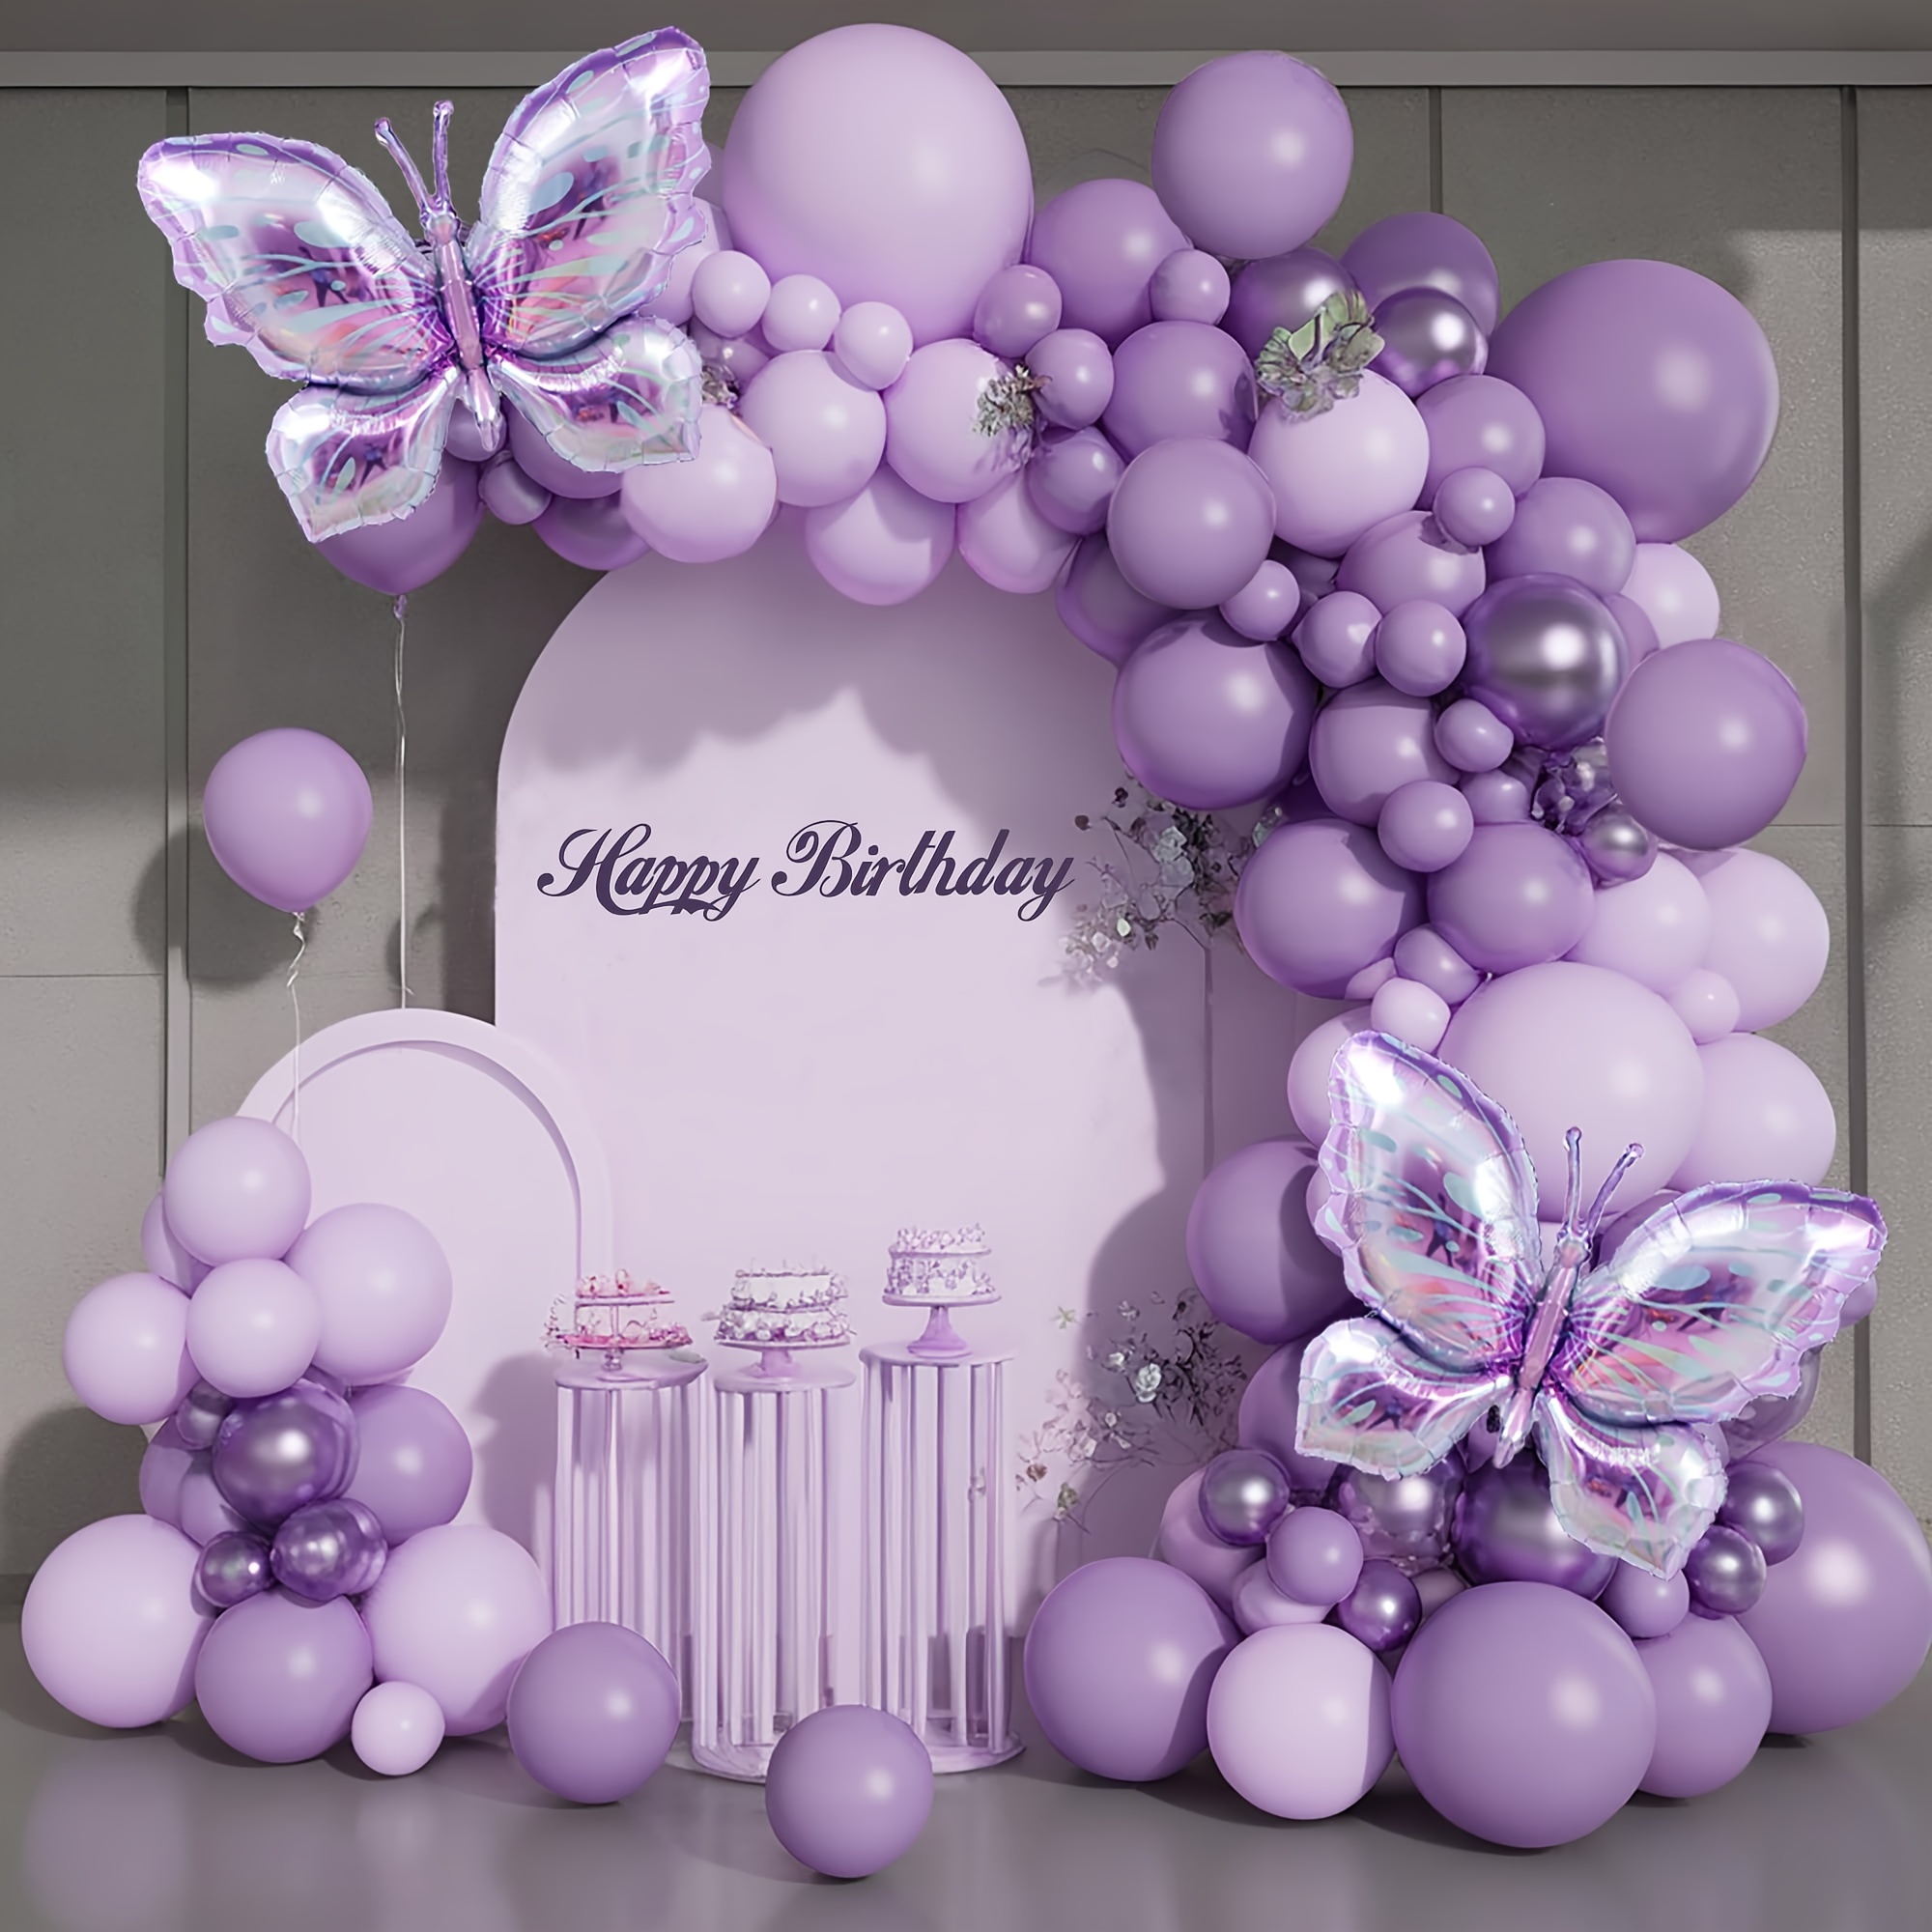 

126pcs Metallic Purple Balloons, Butterfly Balloon Arch Garland Kit For Birthday, Bridal Shower, Anniversary. Wedding, Mother's Day, Gender Reveal, Valentine's Day Party Indoor Outdoor Decoration